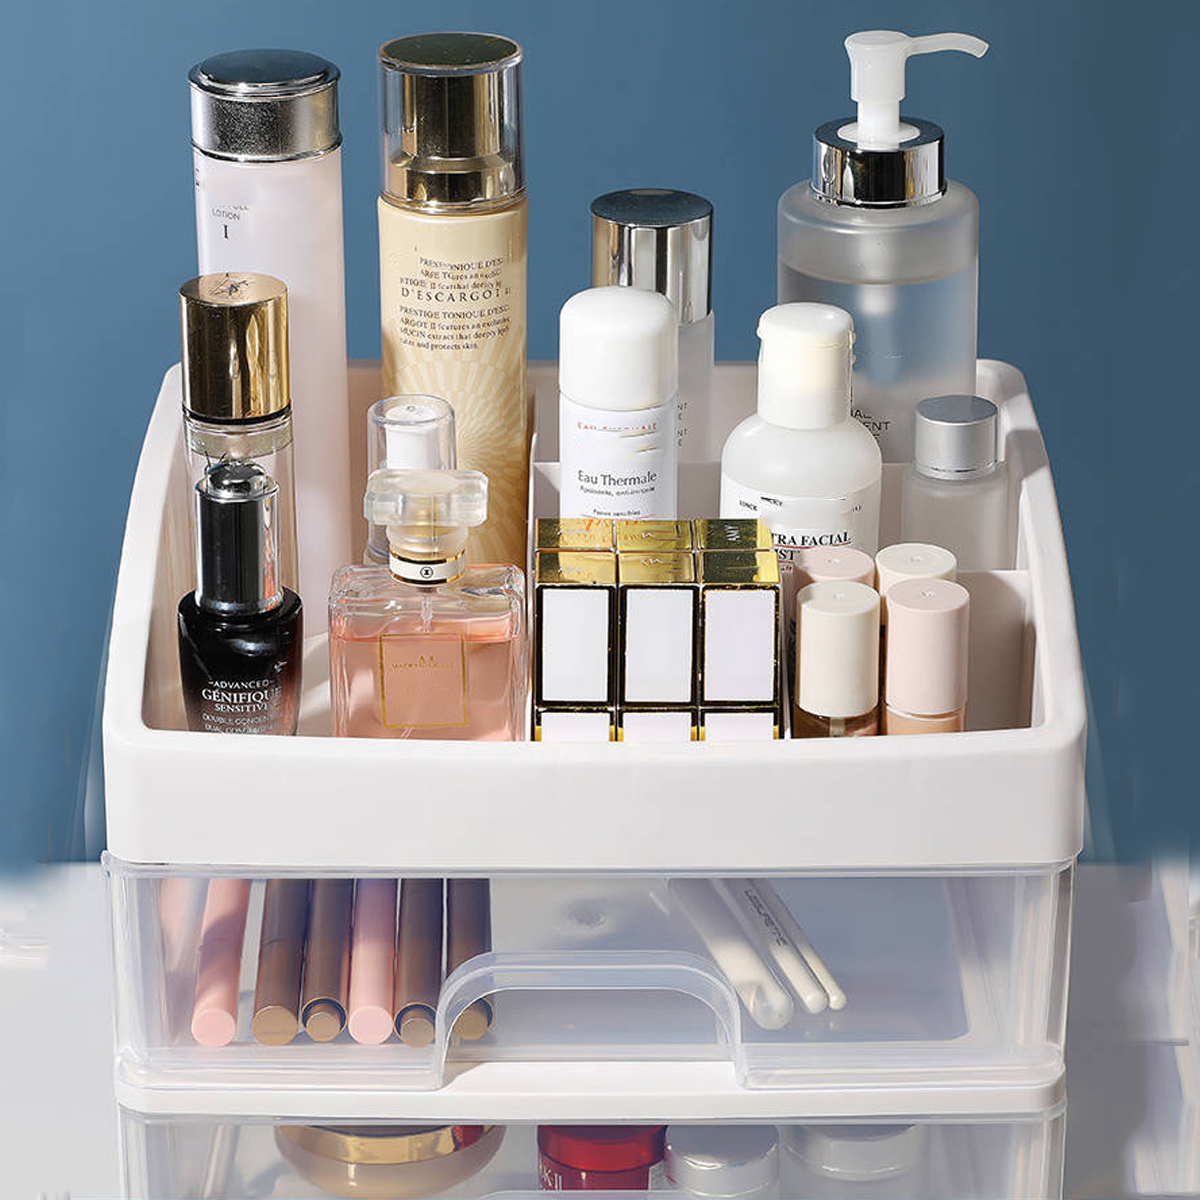 123-Layers-Cosmetic-Storage-Box-Jewelry-Holder-Makeup-Drawer-Case-Desktop-Organizer-Container-1791015-9